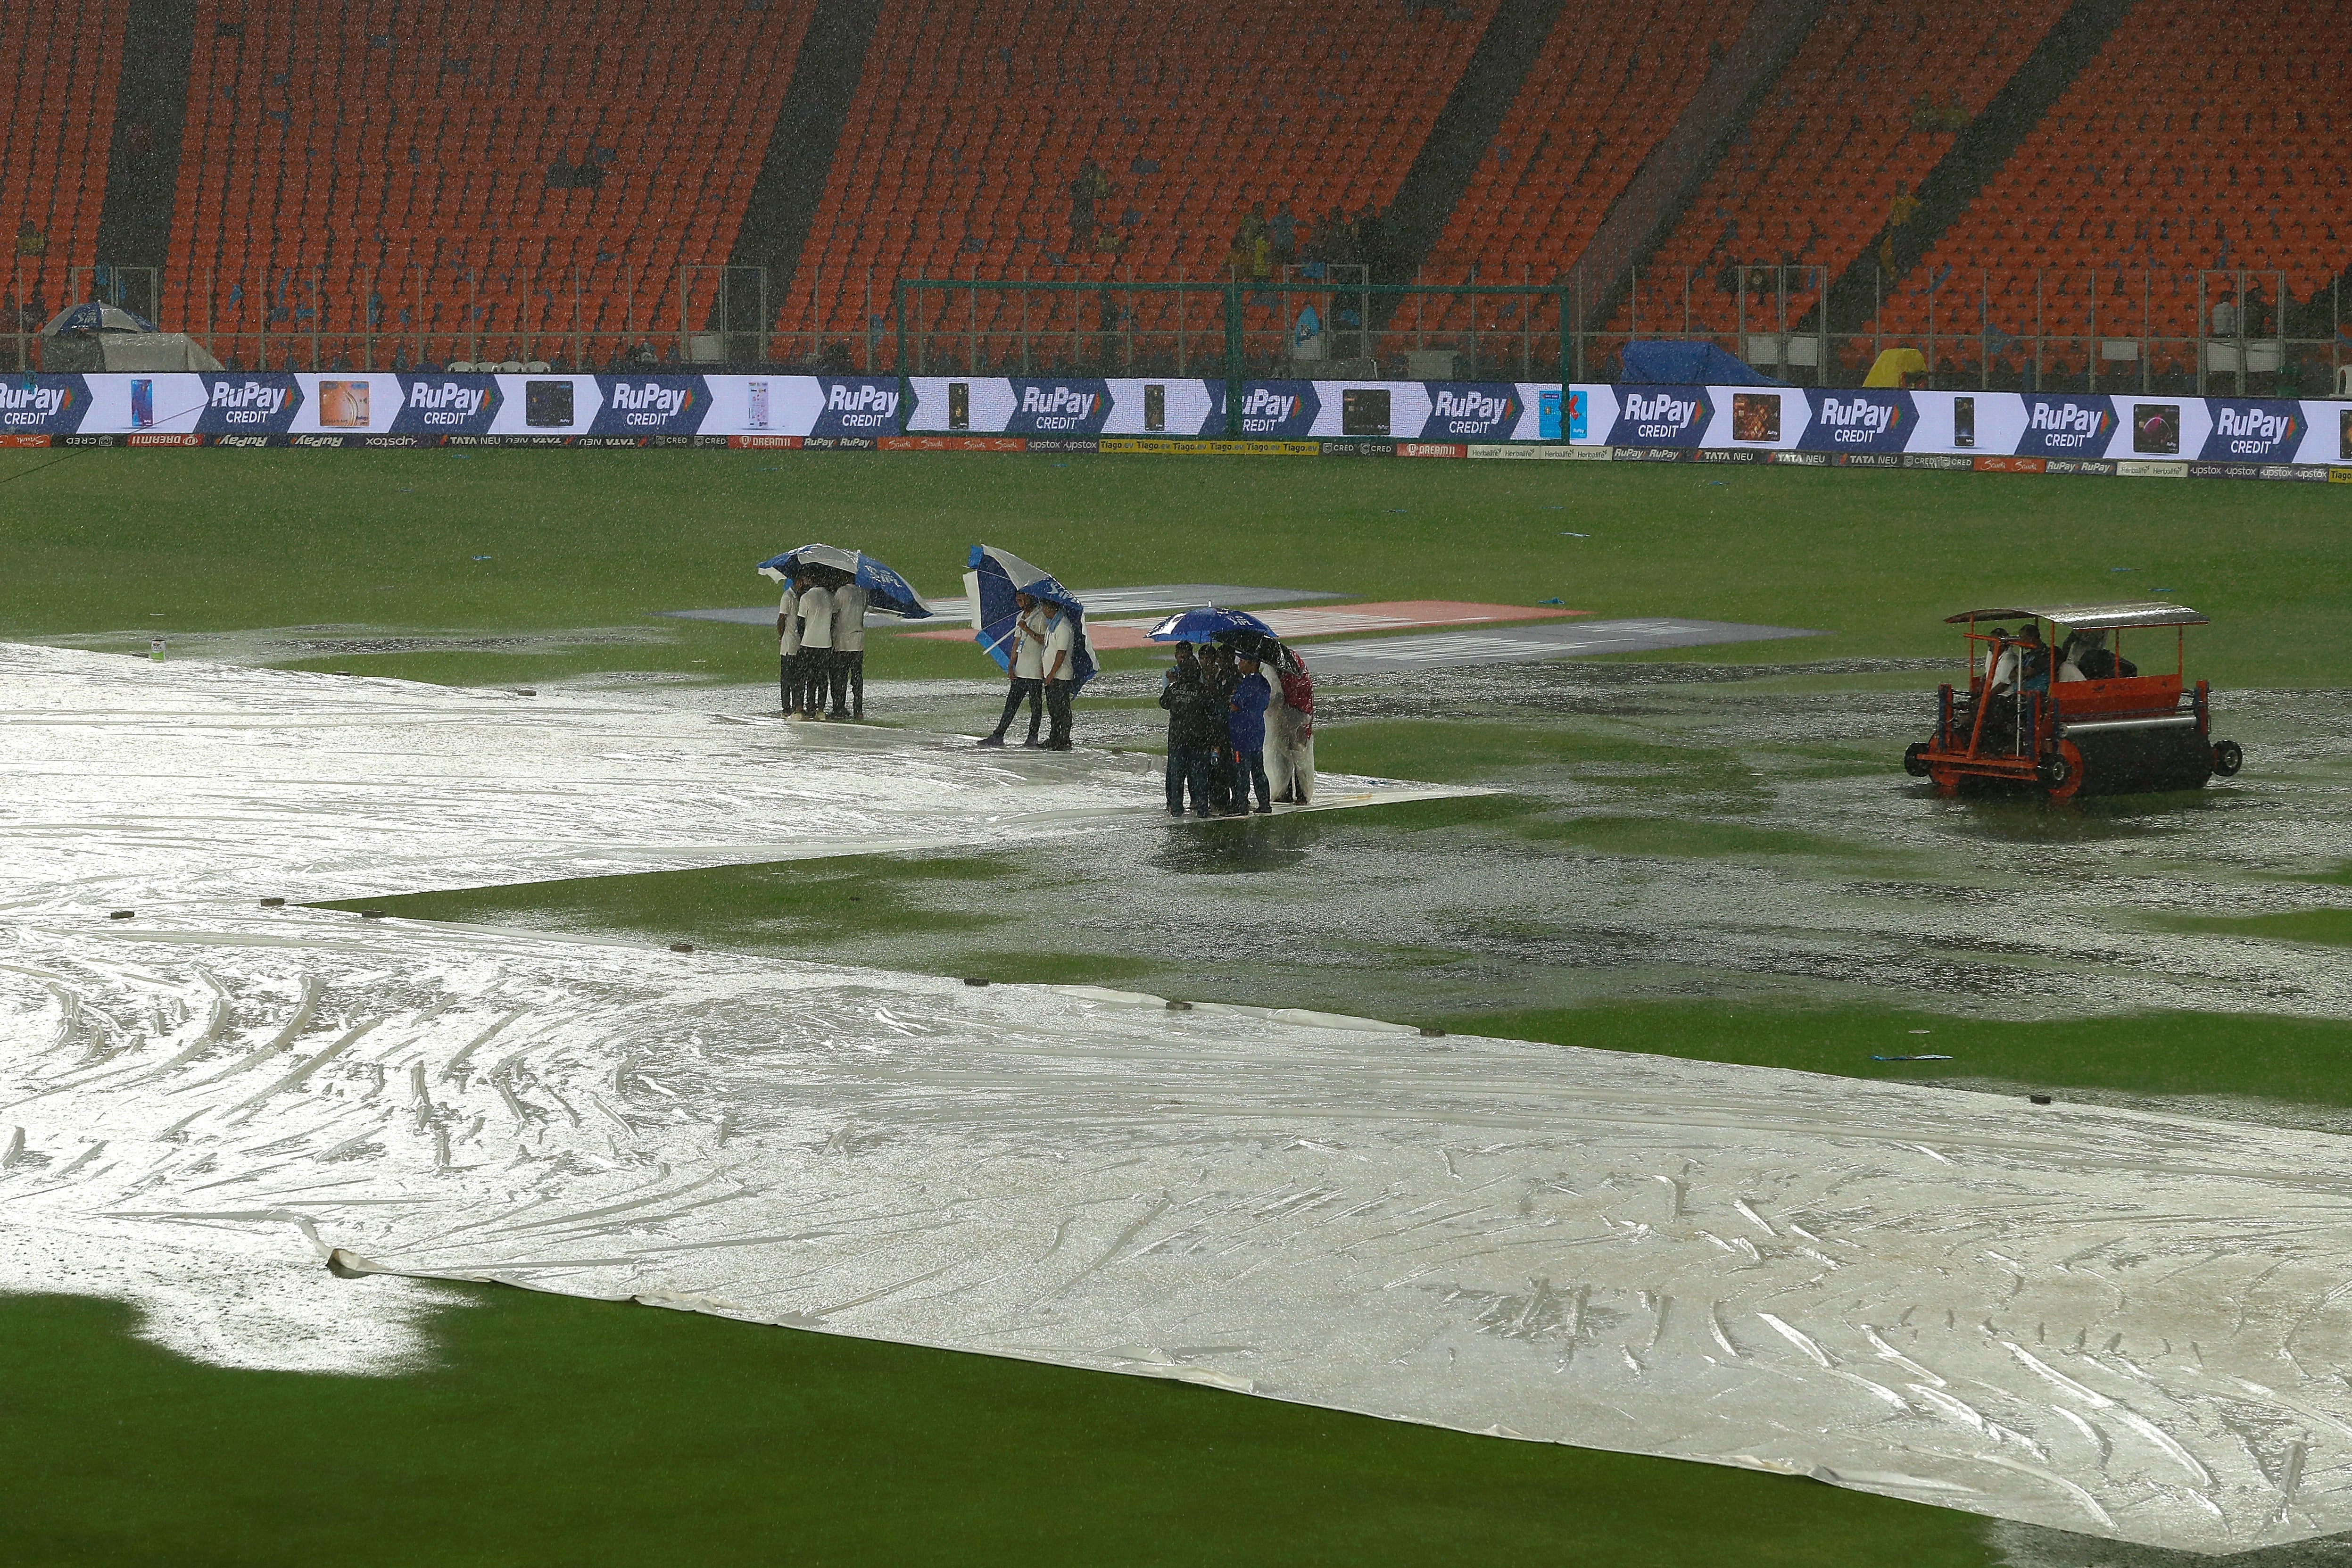 Rain prevented any play in the IPL final on Sunday